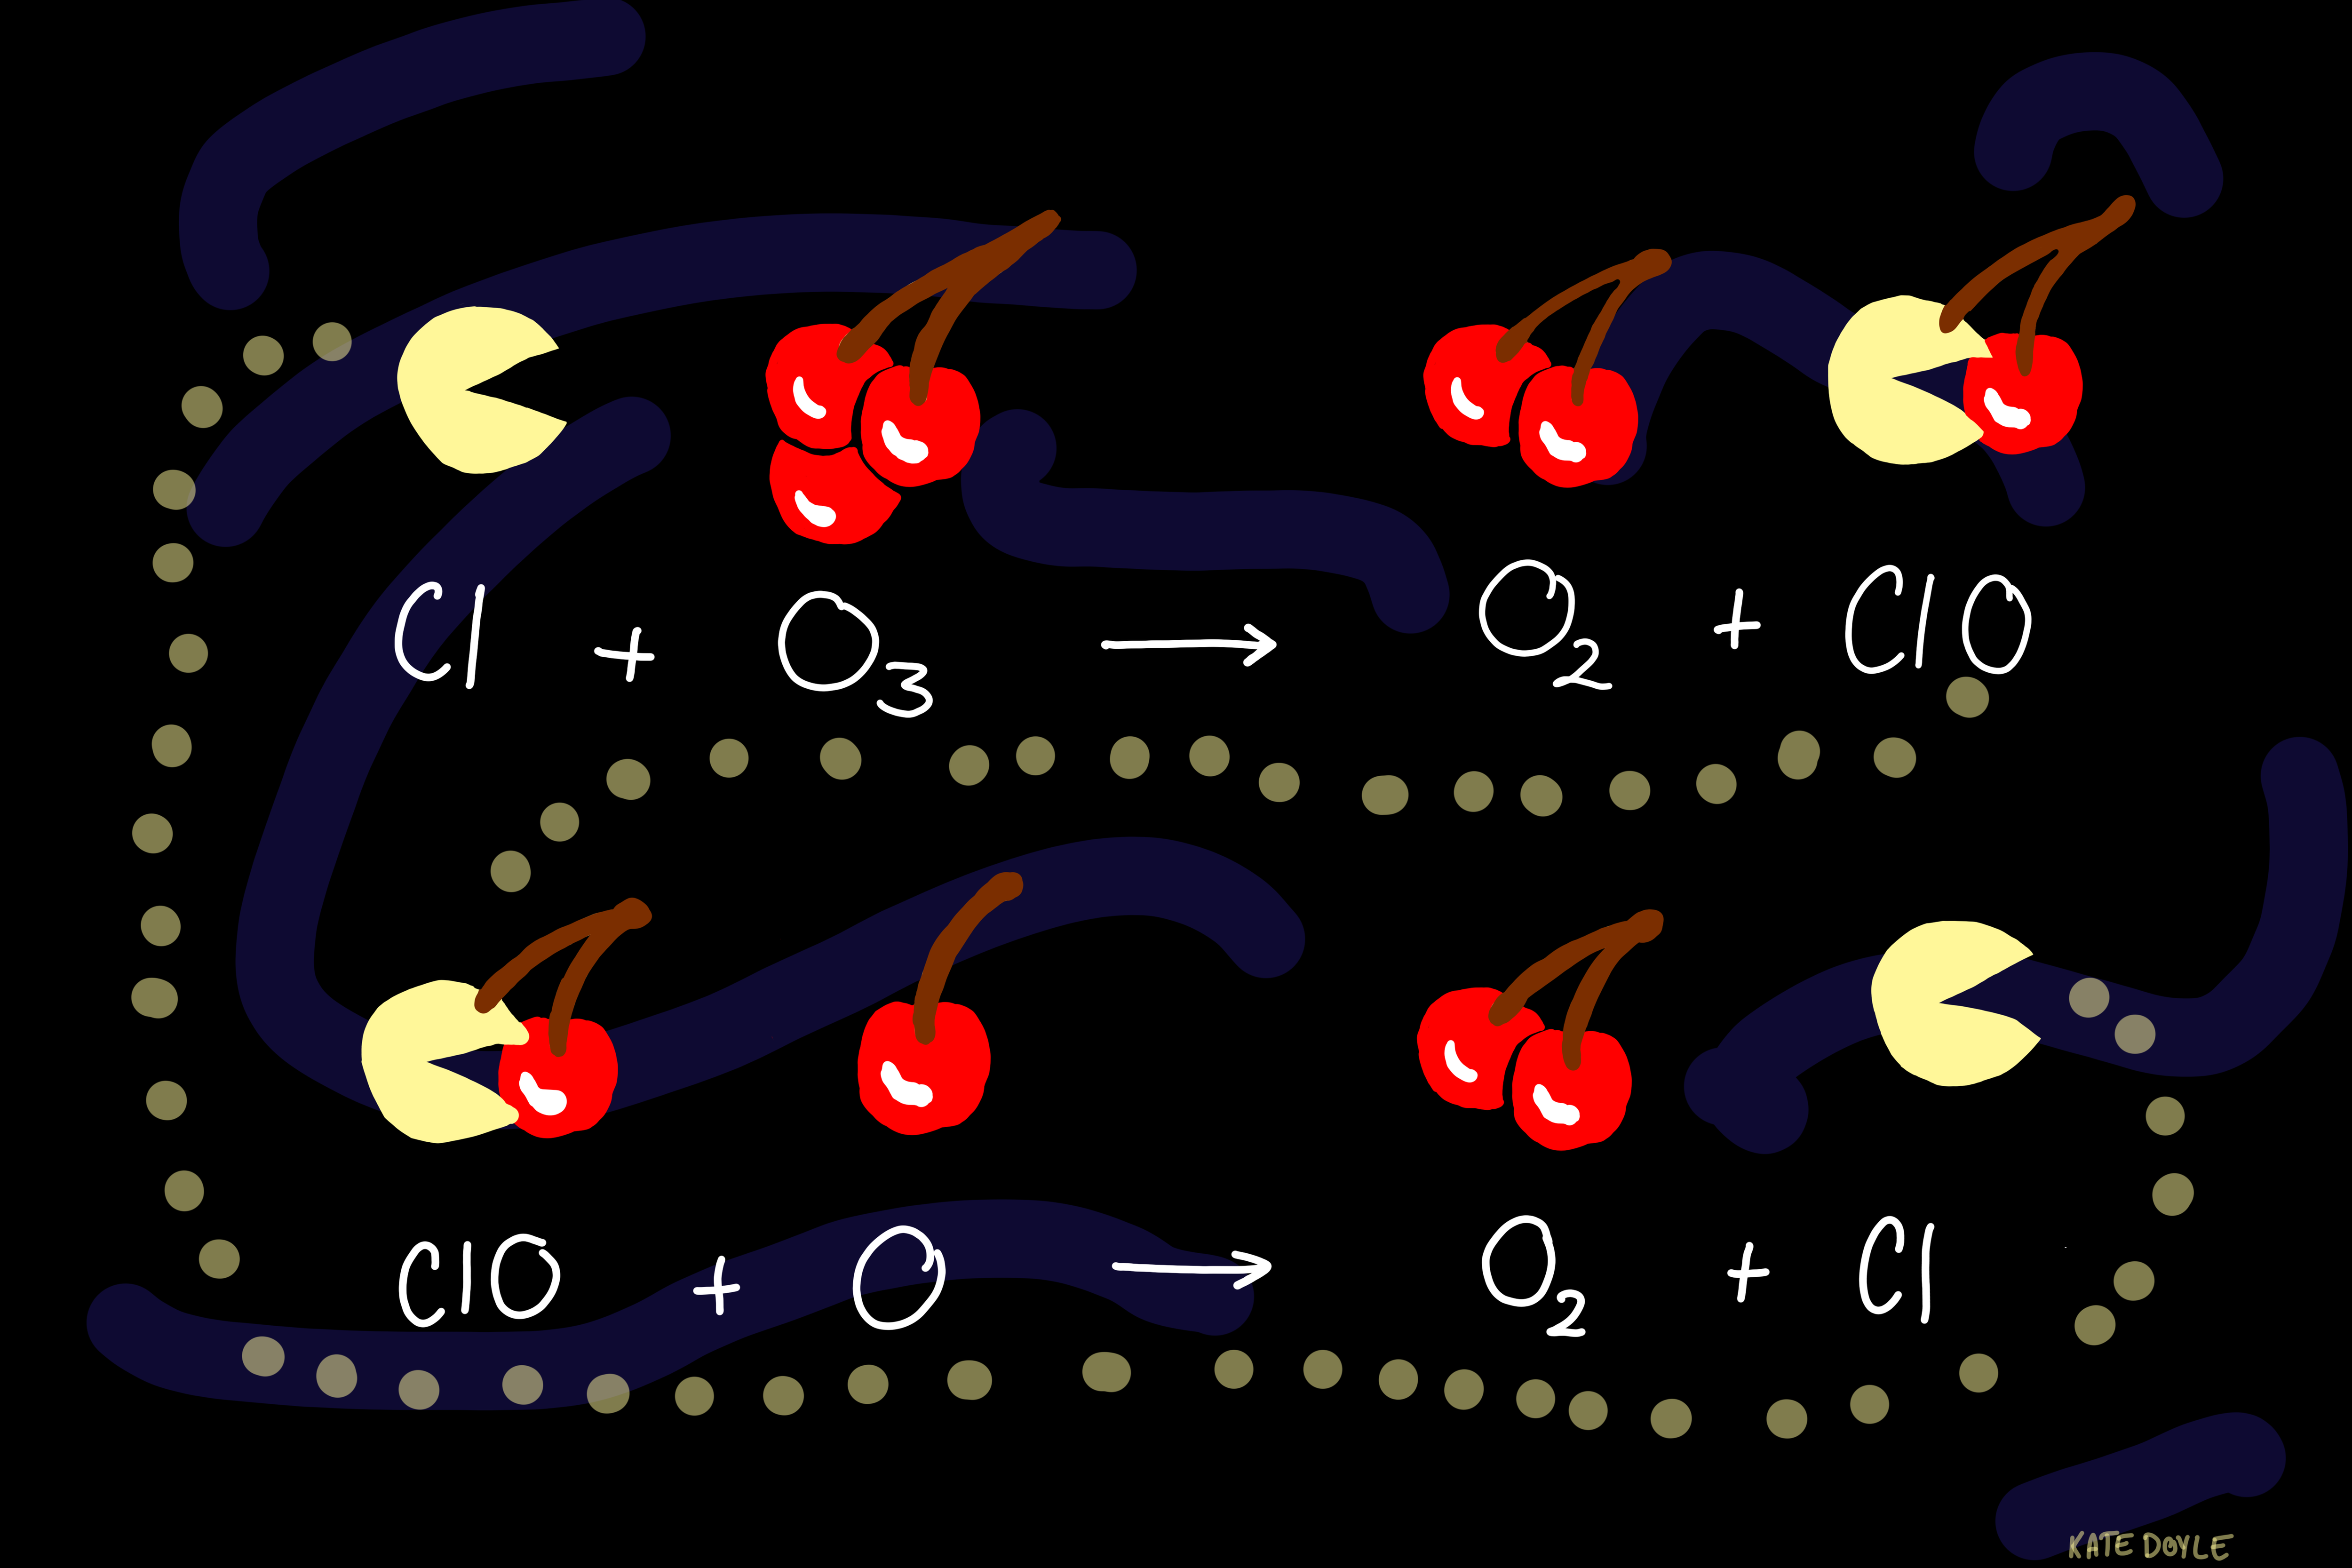 A Pac-Man-themed graphic showing chemical reactions between gas molecules.